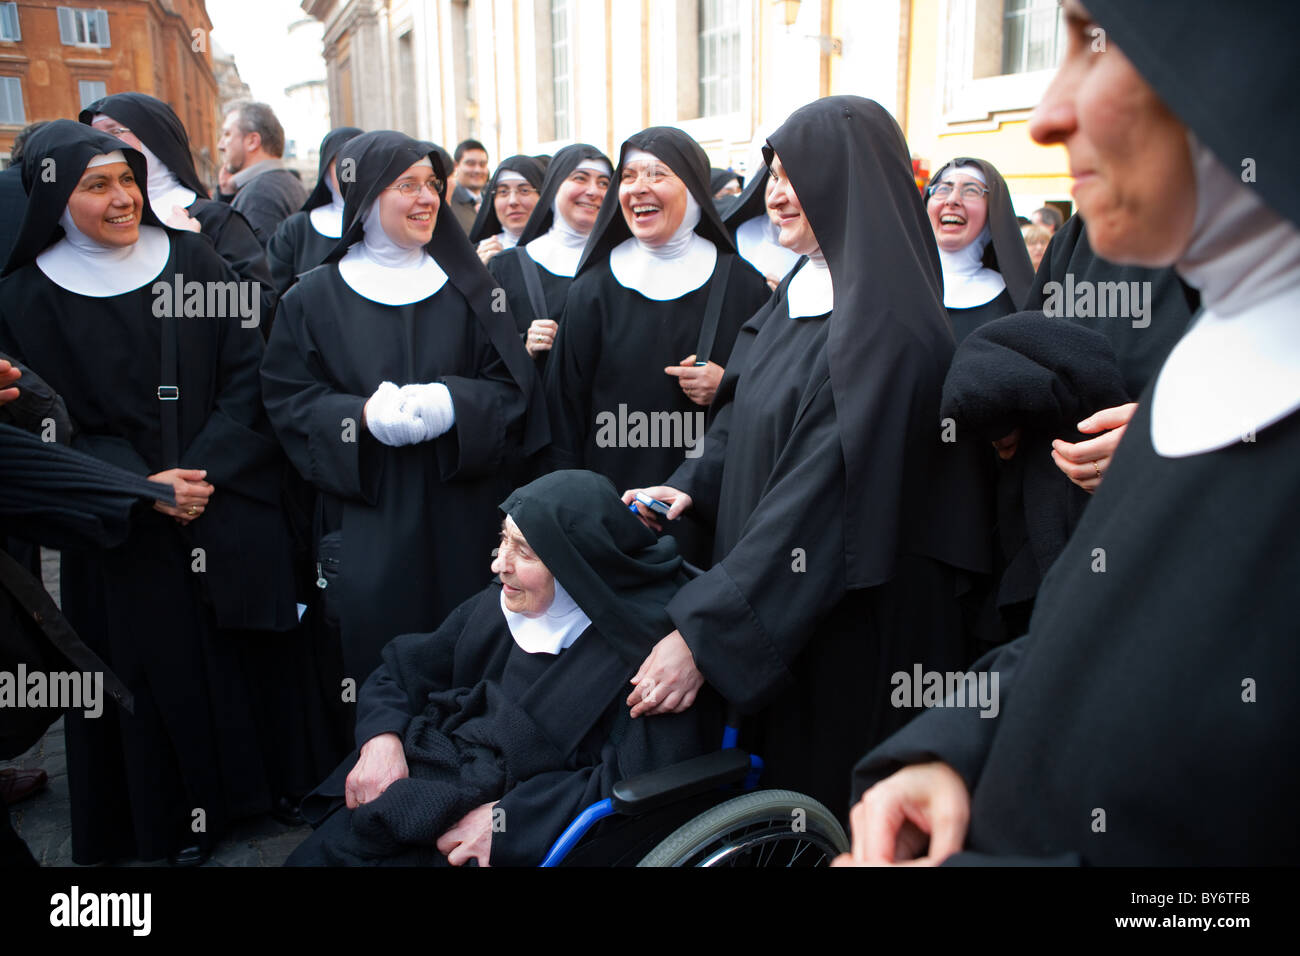 group of nuns in uniform happy funny and smiling in Vatican city Italy Stock Photo